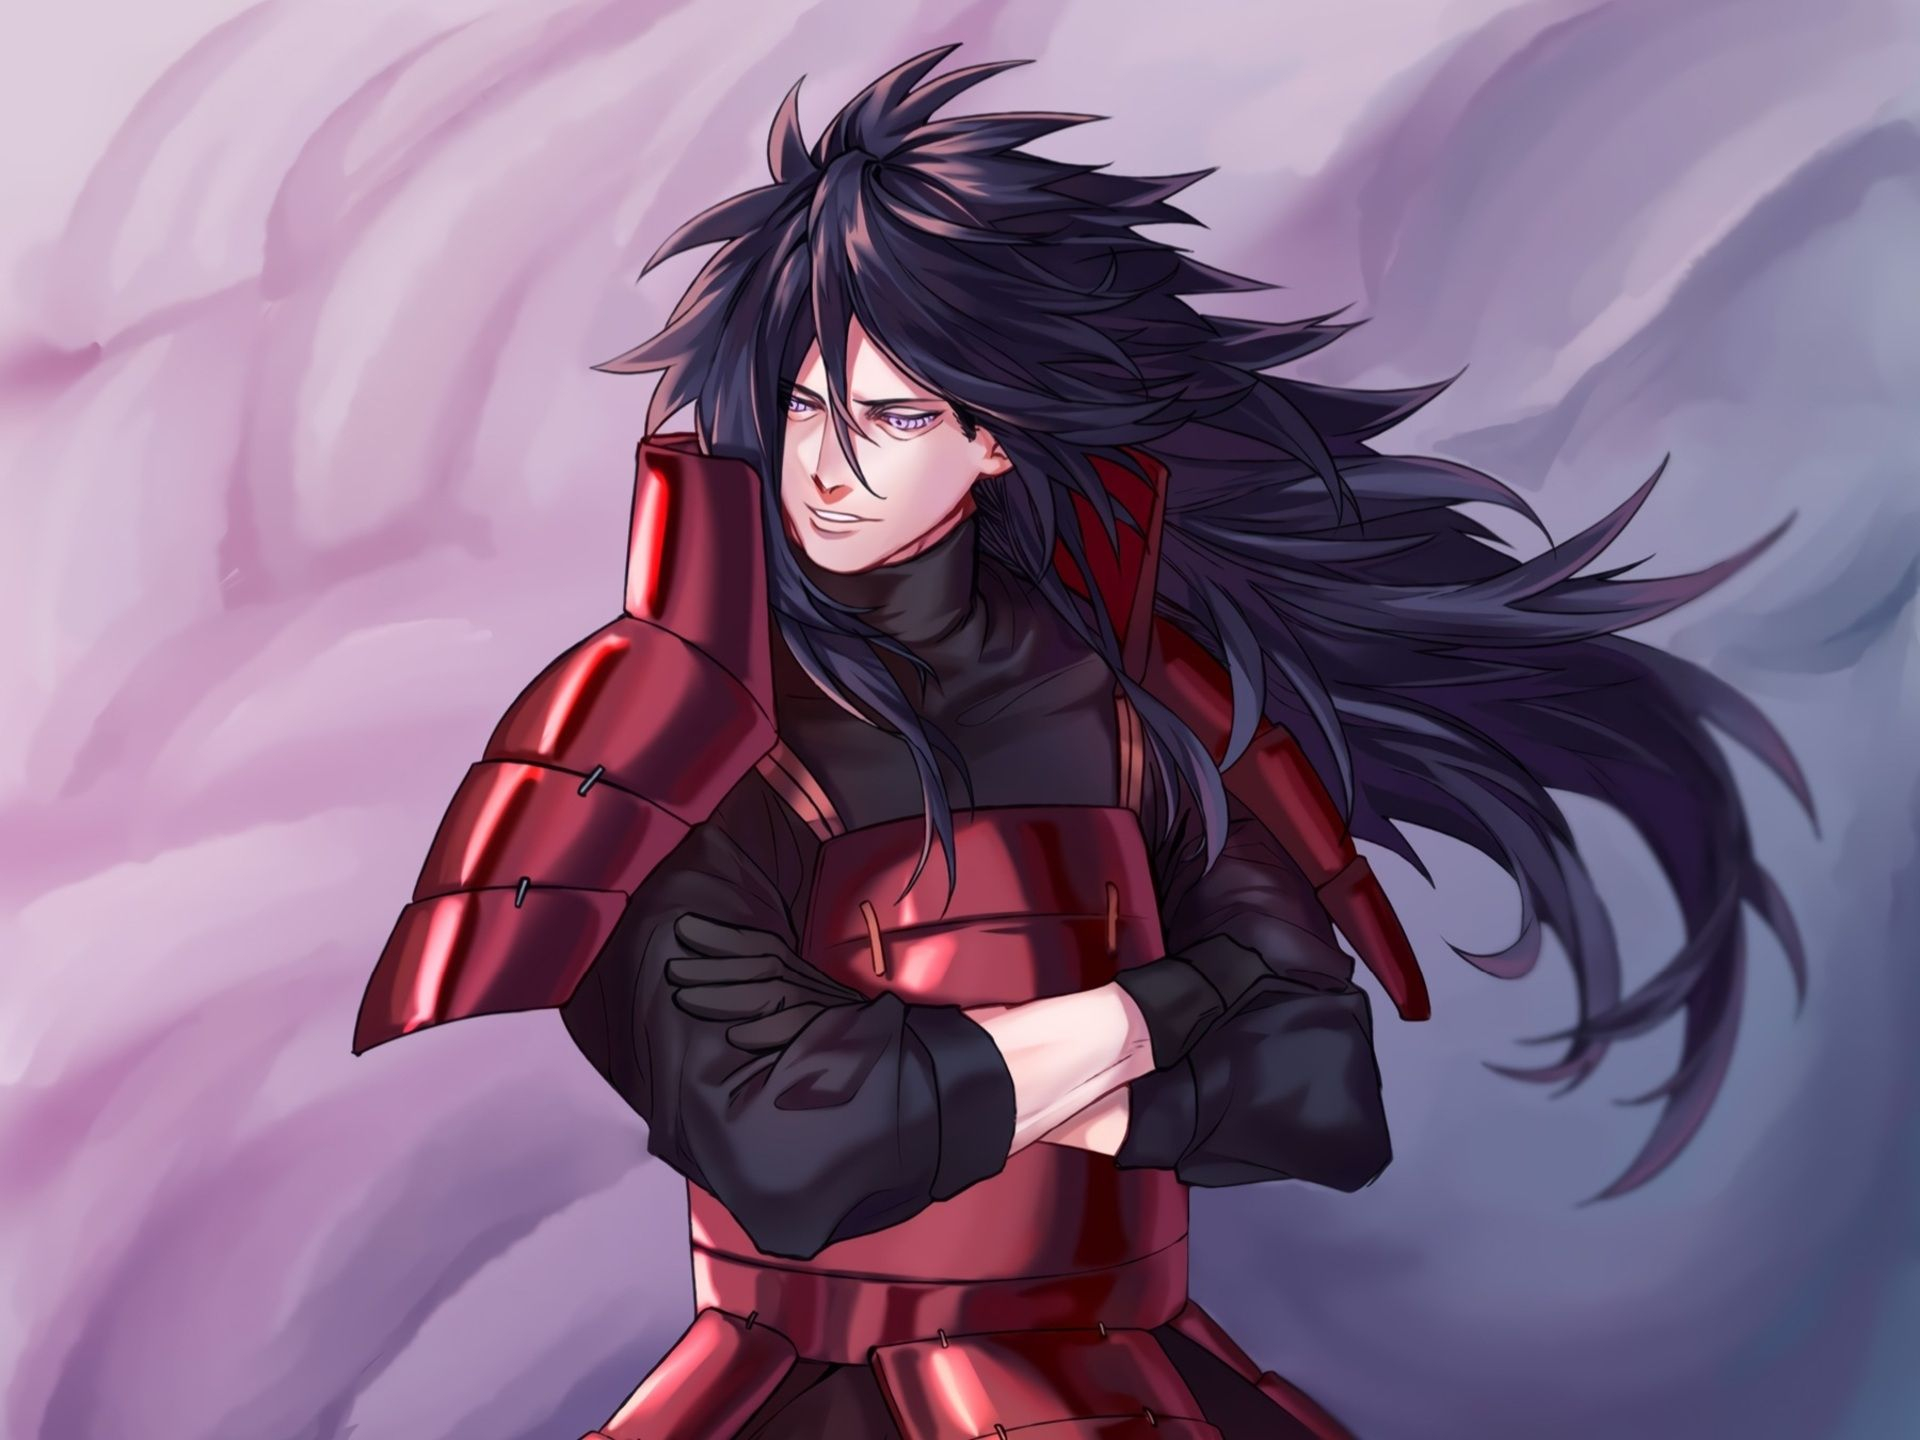 1920x1440 Madara Uchiha Cool Artwork Wallpaper, HD Anime 4K Wallpapers, Images, Photos and Background Wallpapers Den | Madara uchiha, Uchiha, Naruto cute